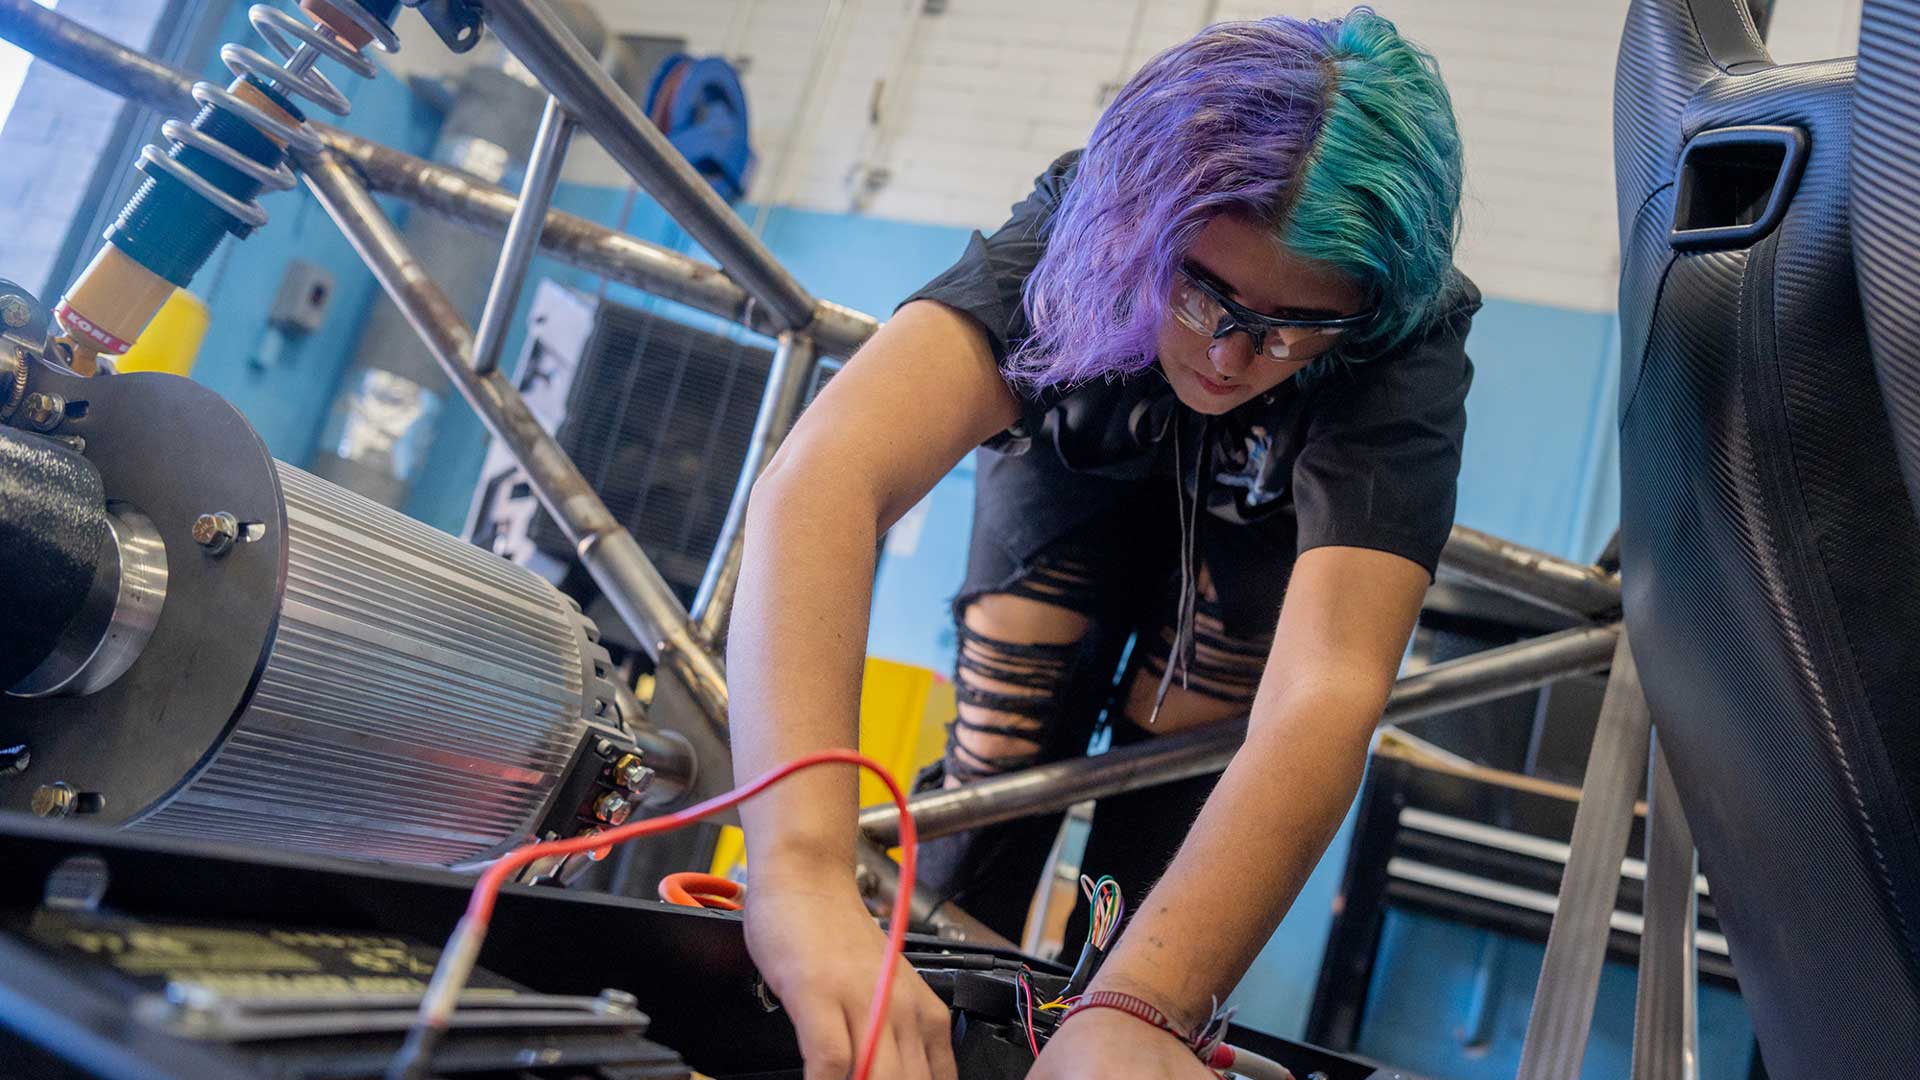 Senior Adrina Wilder works on an electric vehicle during class at Cactus High School in Glendale on Oct. 31, 2022. (Photo by Samantha Chow/Cronkite News)